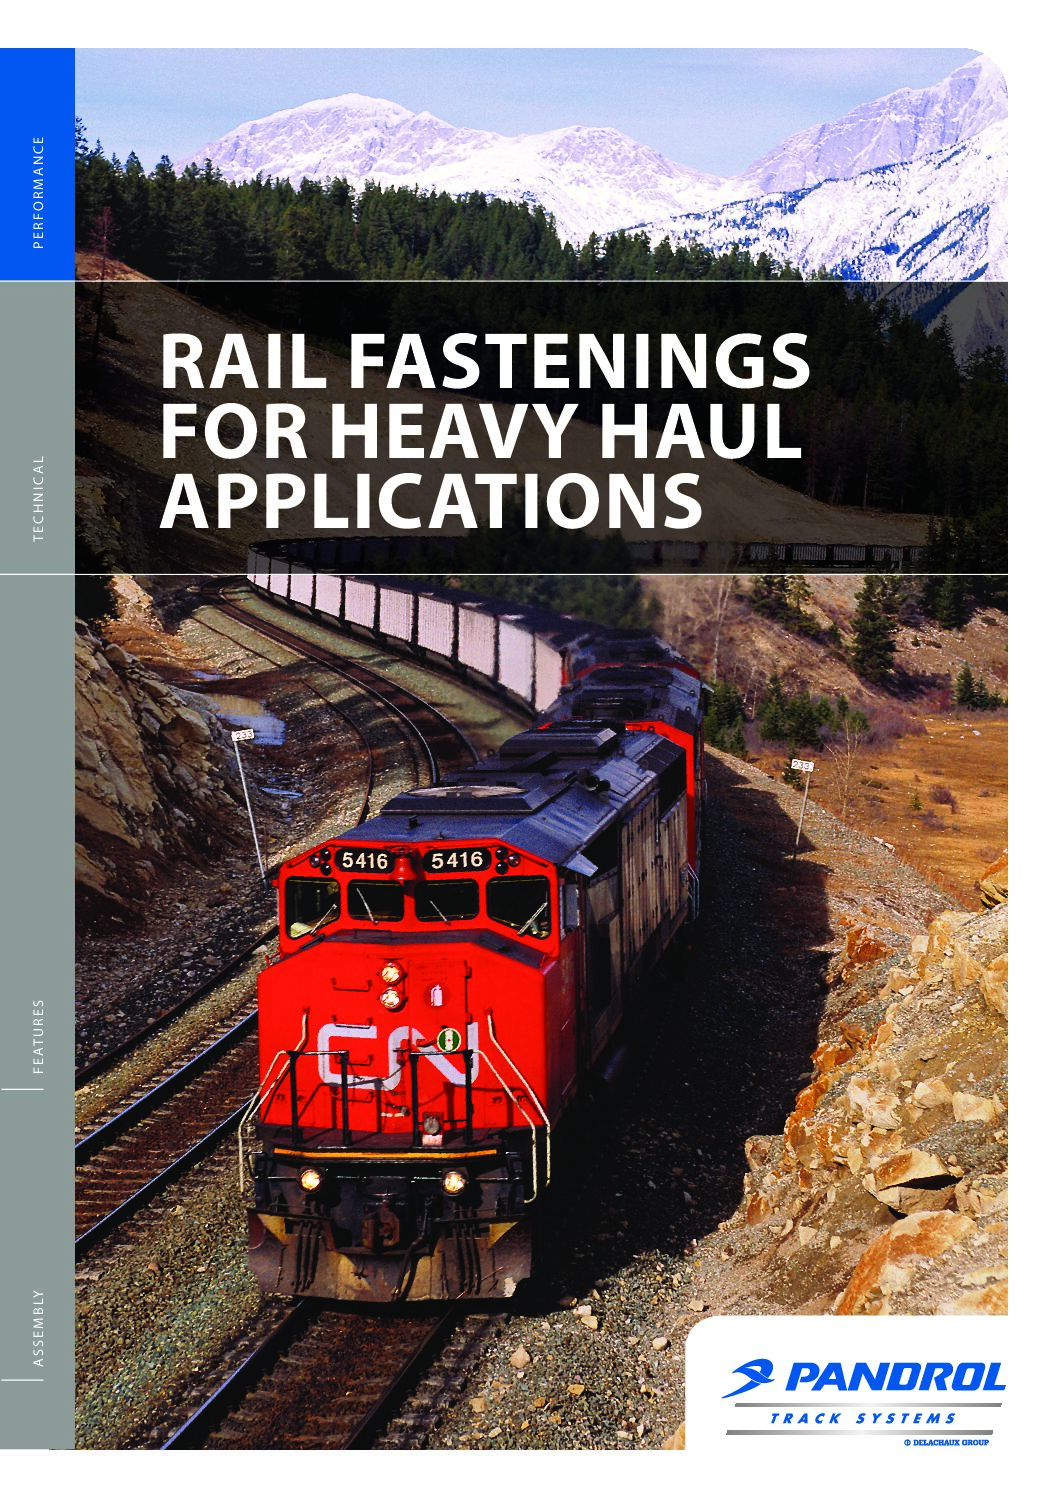 Brochure Outlining the Achievements of Pandrol in the Heavy Haul Market